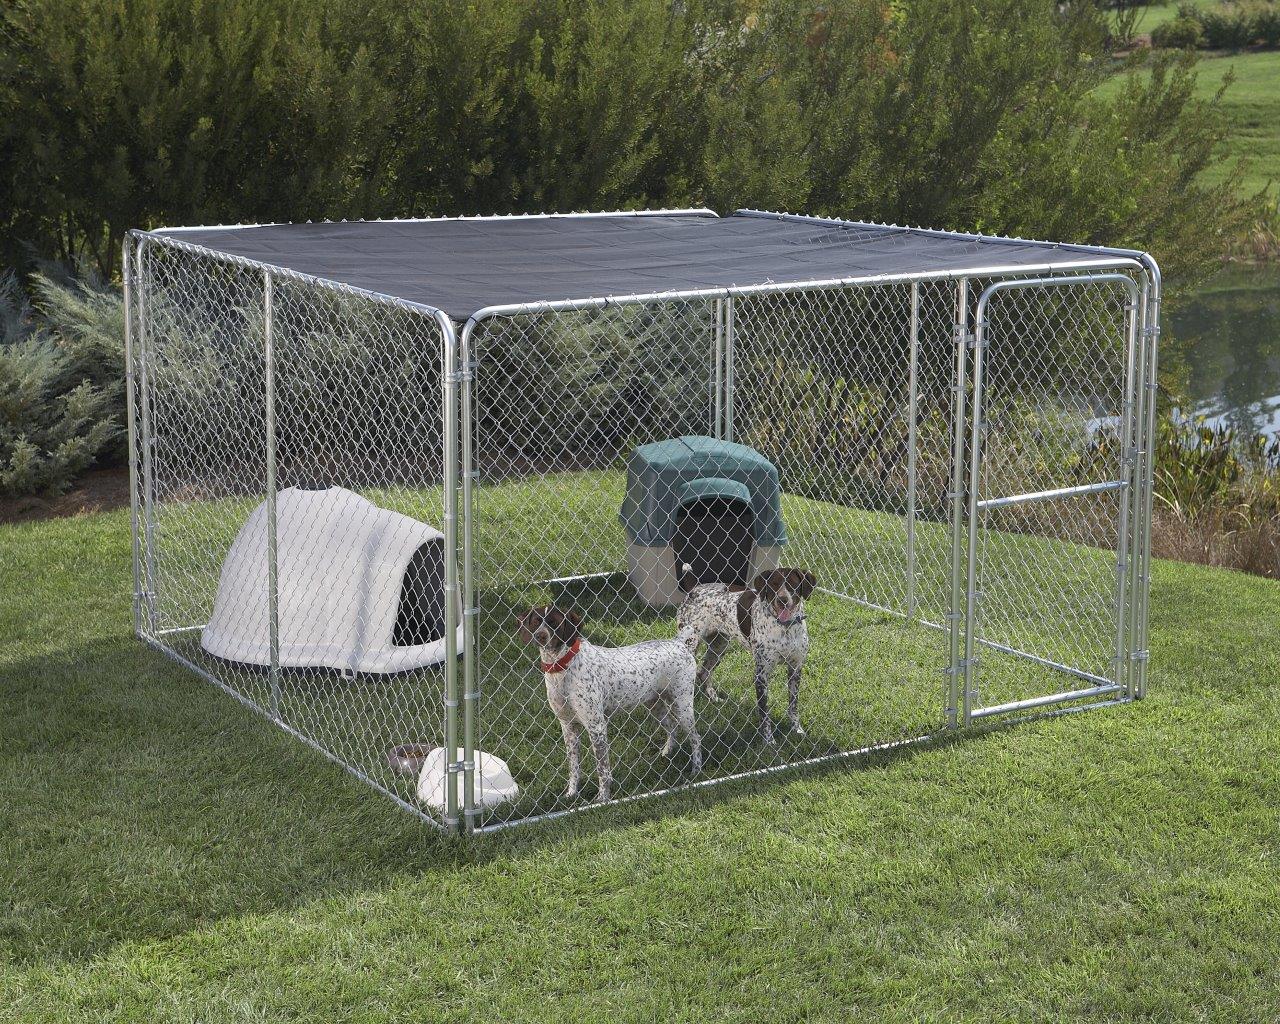 STEPHENS PIPE & STEEL DKTB11010 10 ft x10 ft Kennel Shade Cover at Sutherlands